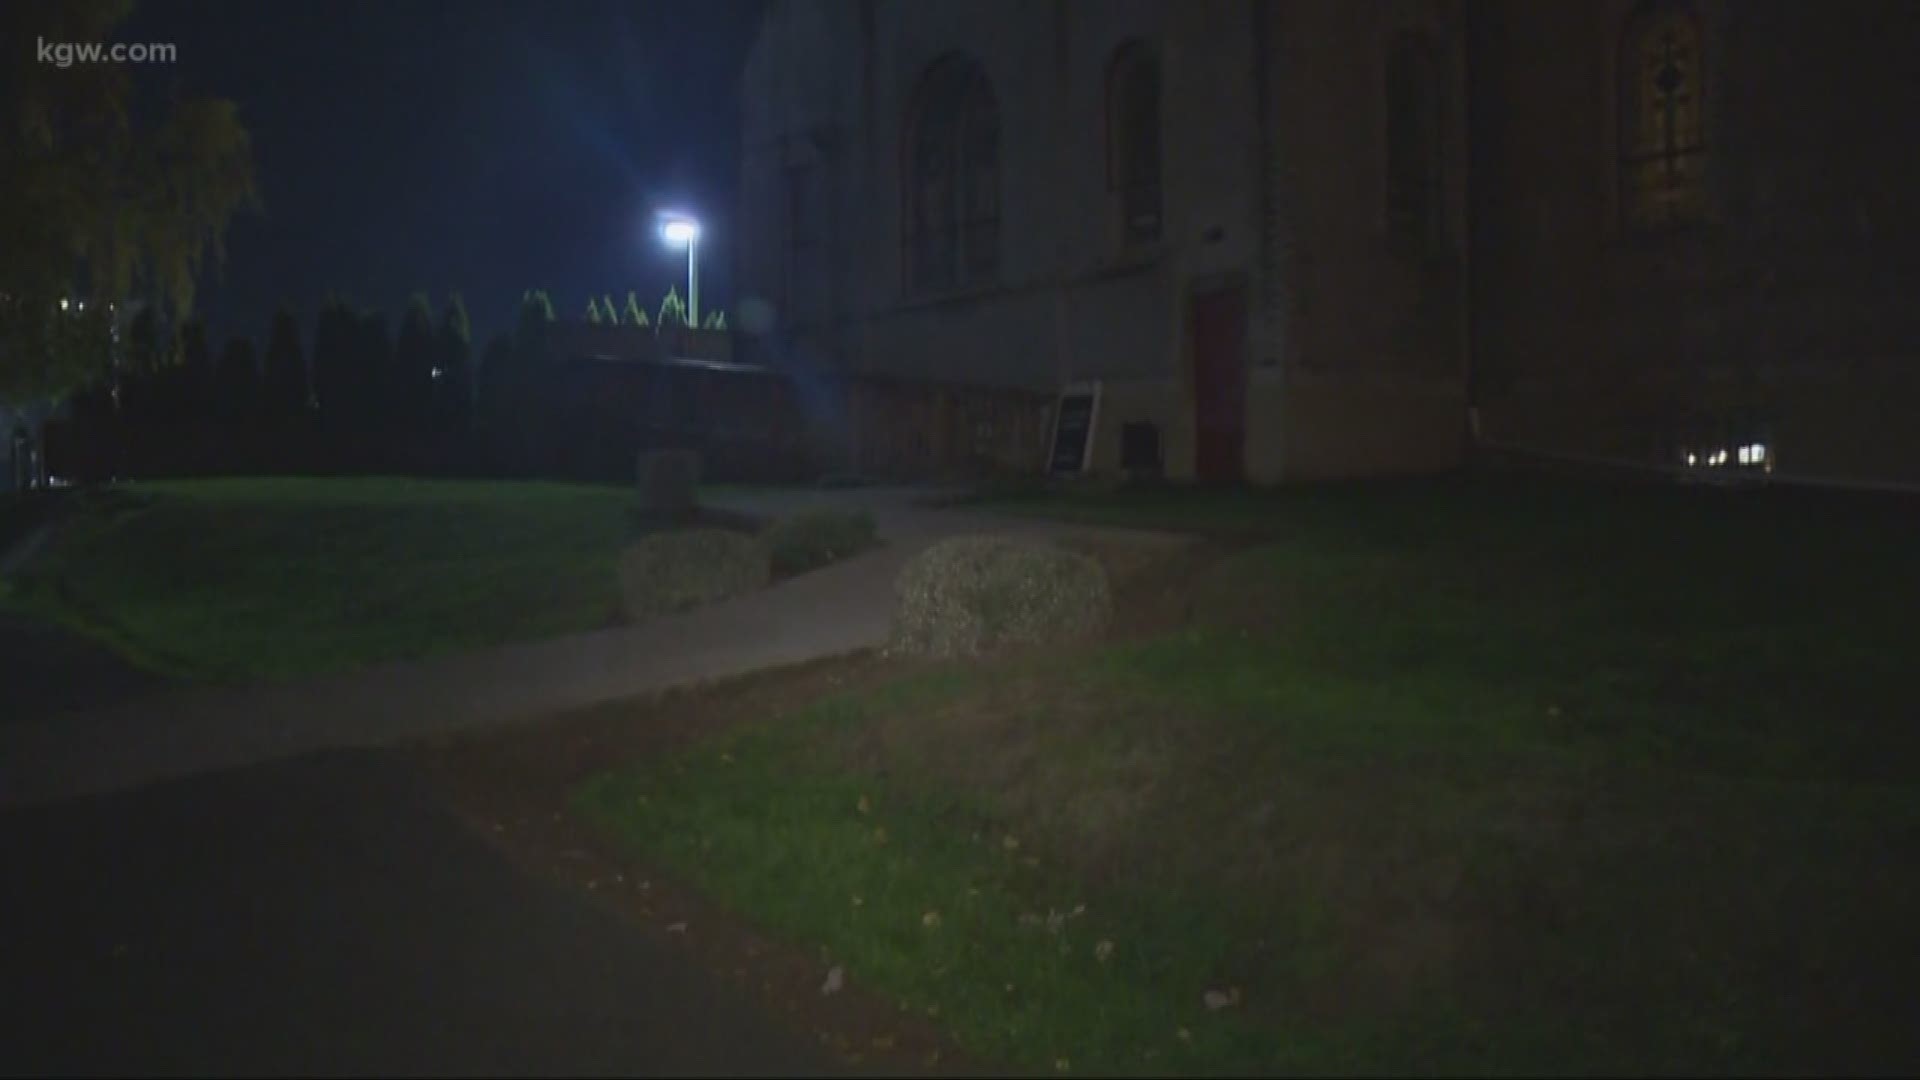 A local pastor was stabbed in the parking lot of The Well Community Church in Northeast Portland on Sunday afternoon.